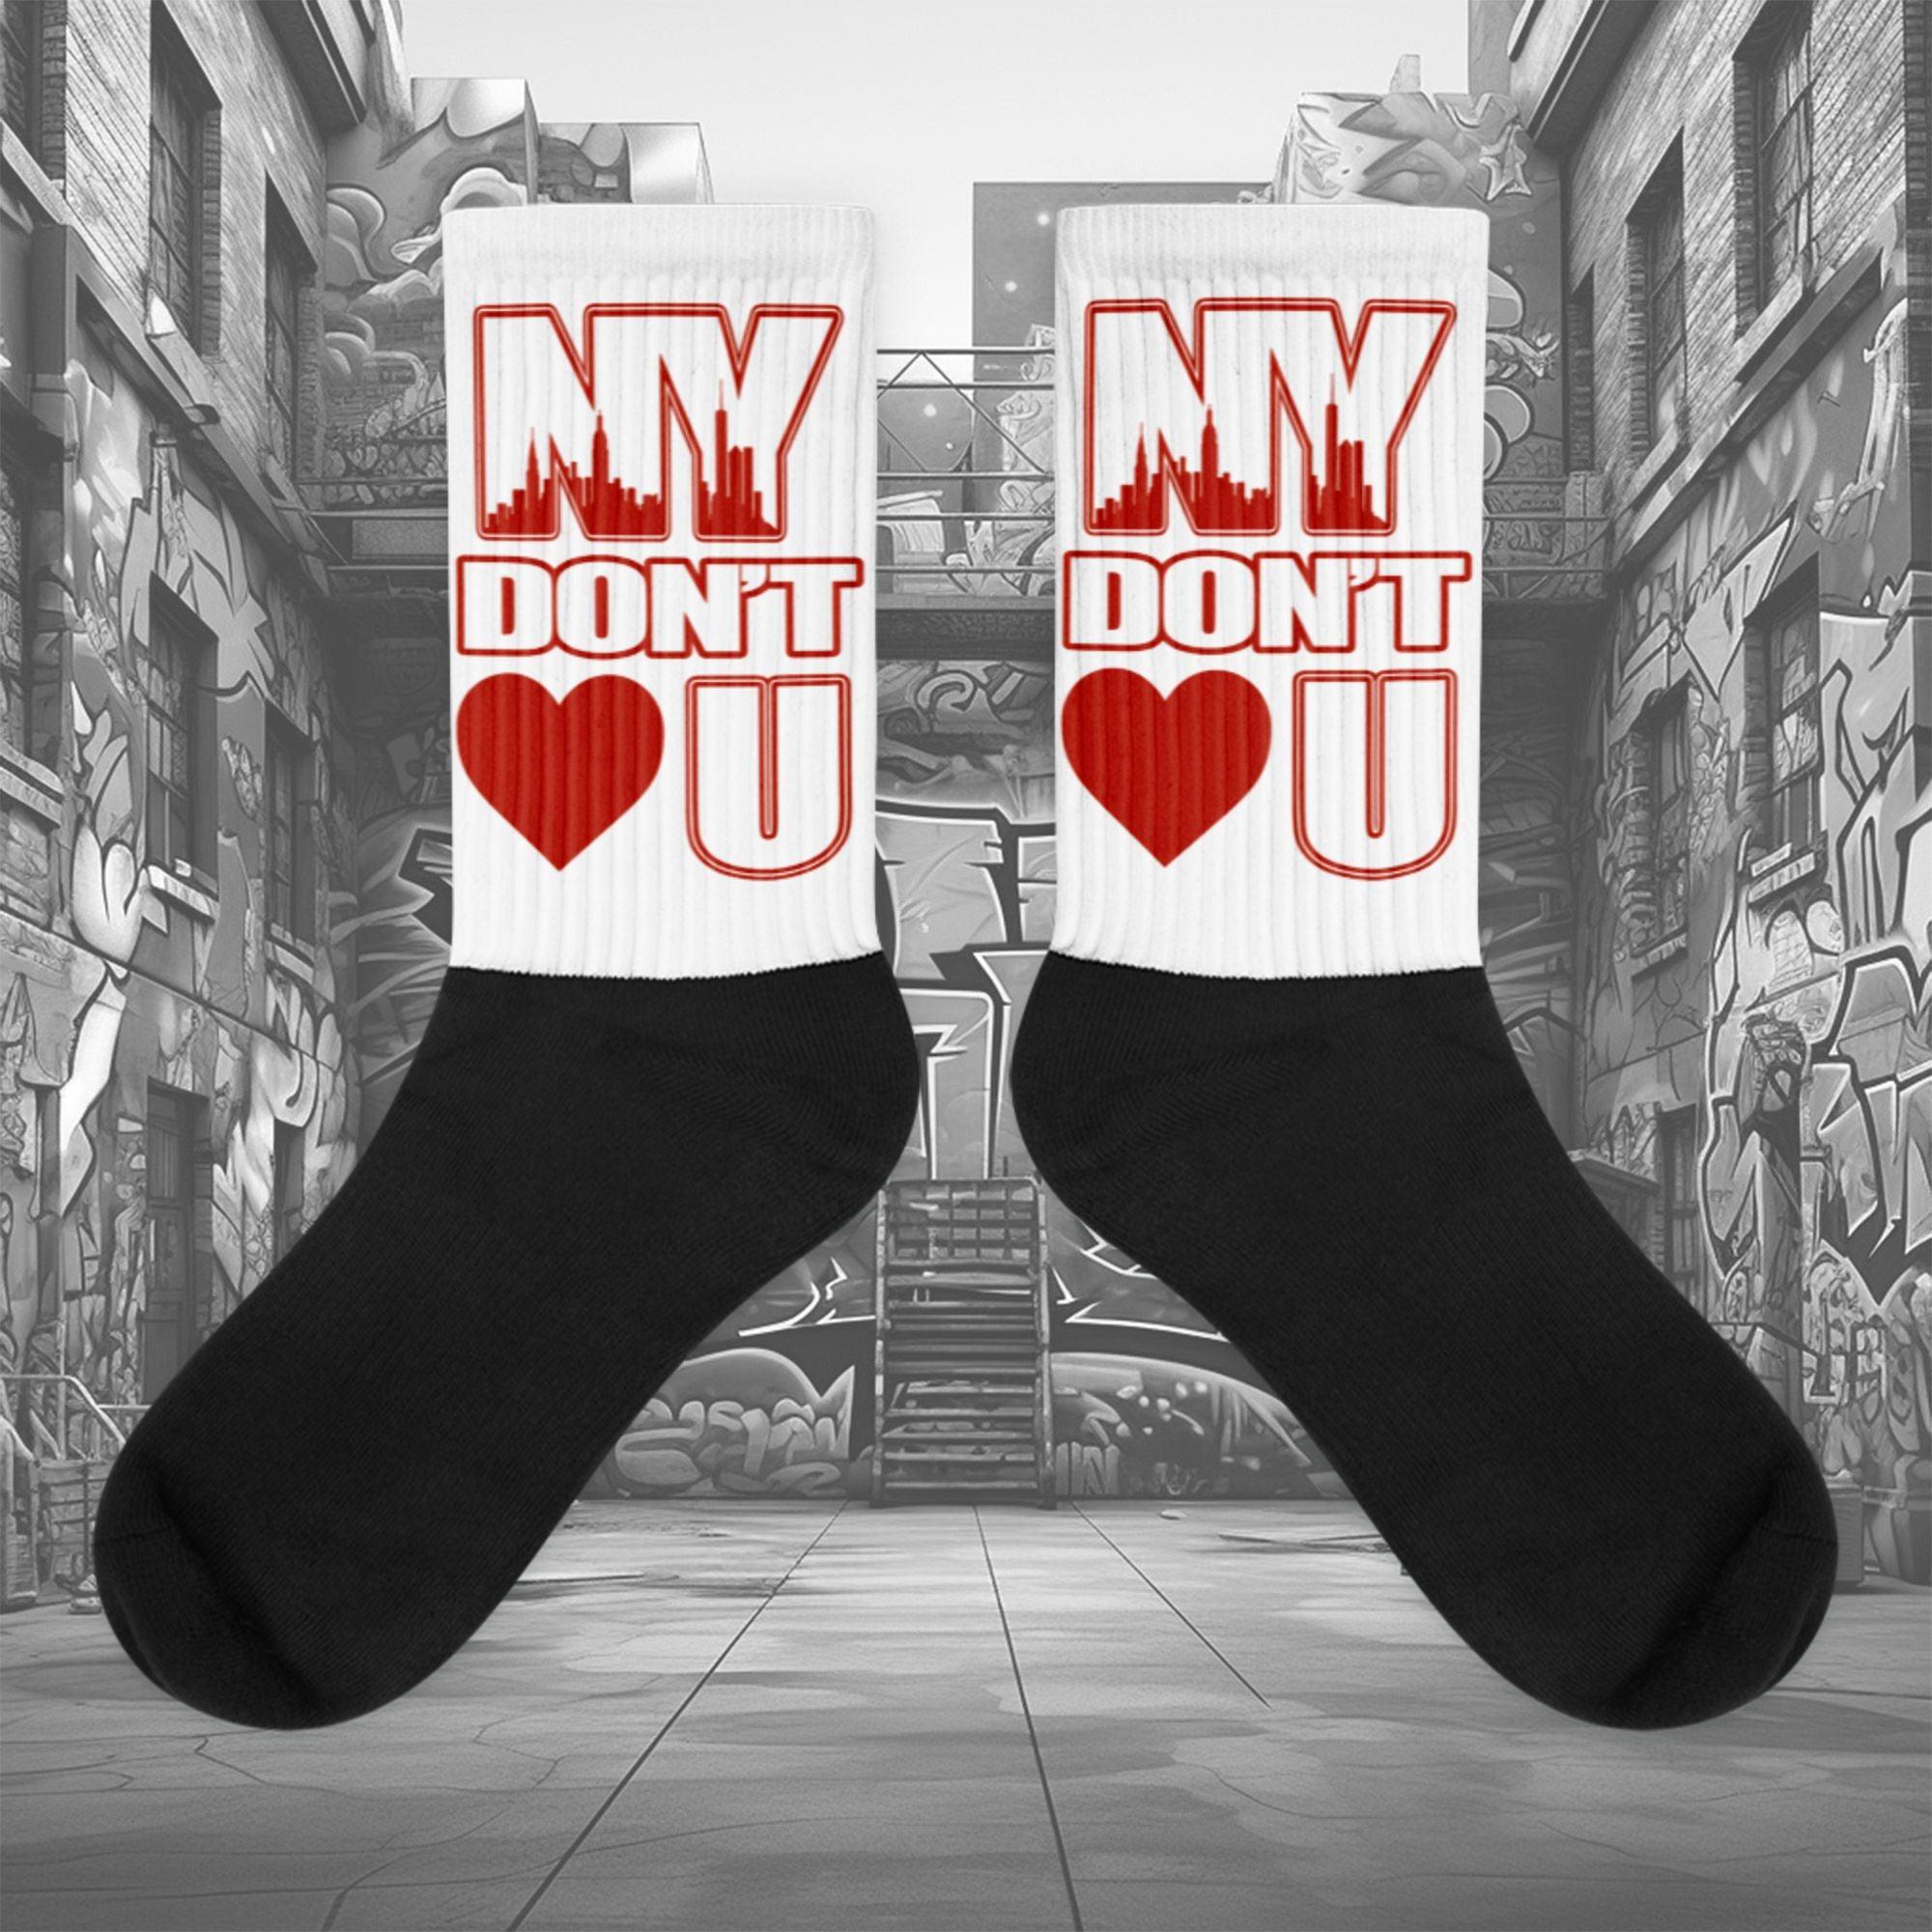  Showcases the view of the socks, highlighting the vibrant ' NY Don’t Love U ' design, which perfectly complements the Air Jordan 11 Cherry sneakers. The intricate pattern and color scheme inspired by the  theme are prominently displayed.  Focusing on the ribbed leg , cusioned bottoms and the snug fit of the socks. This angle provides a clear view of the texture and quality of the material blend.